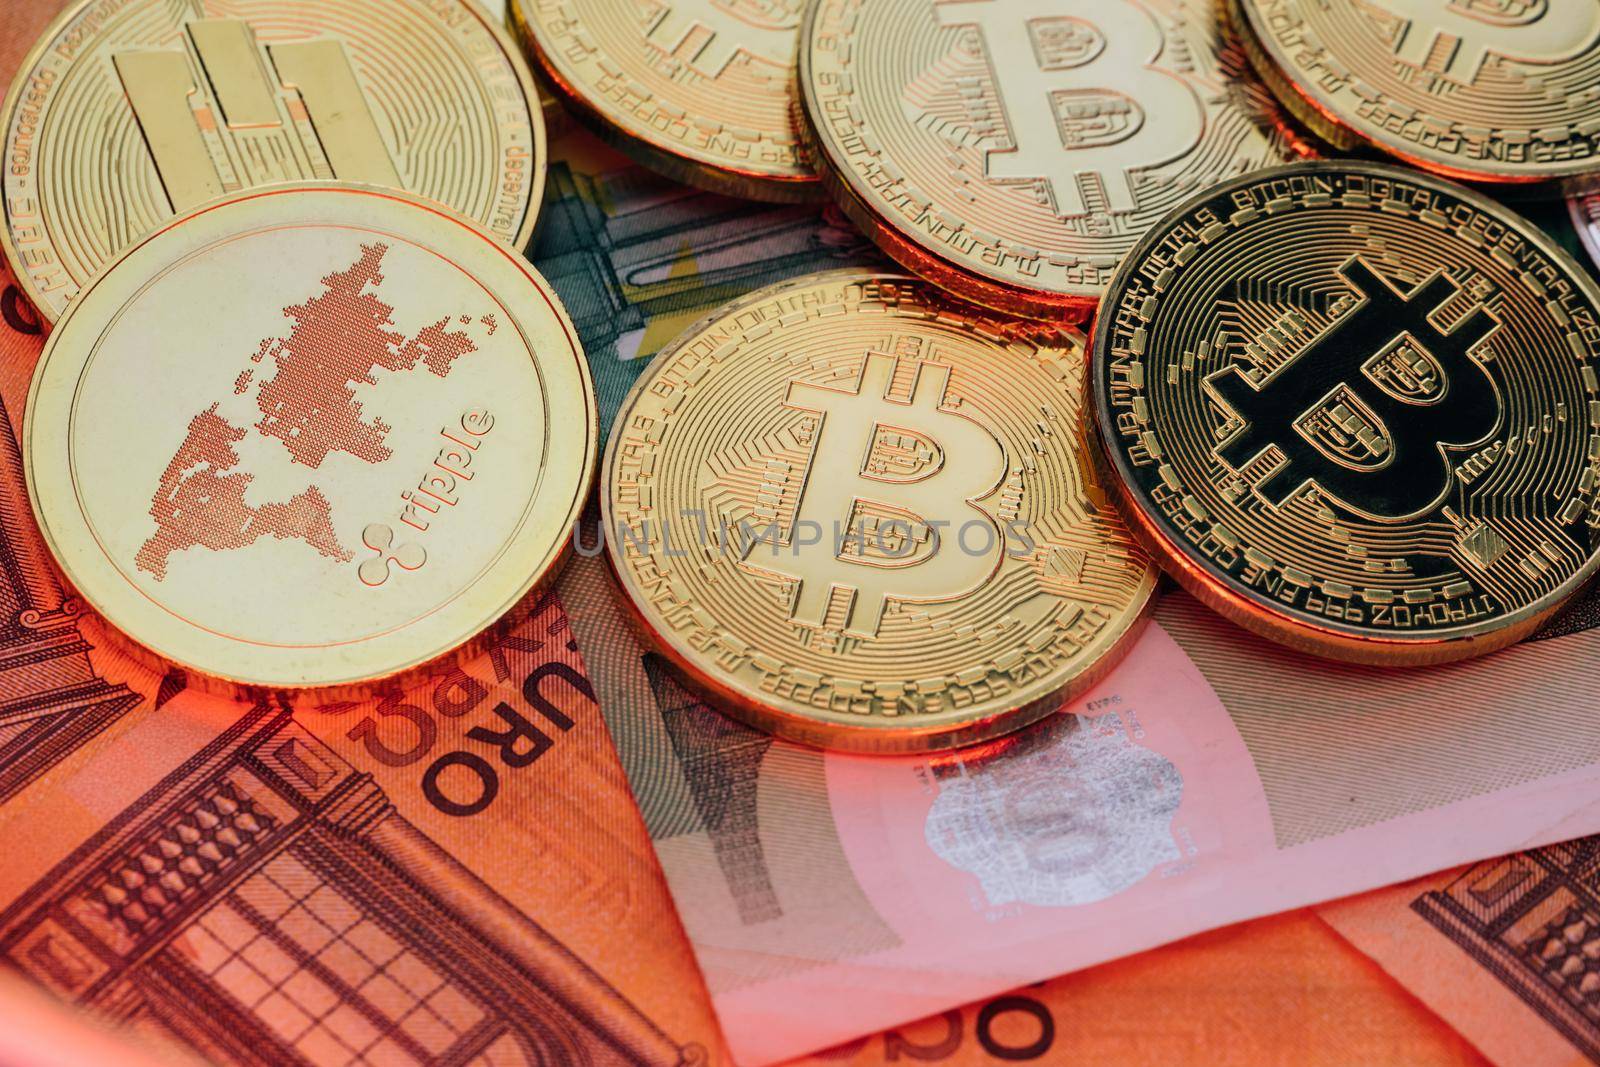 Bitcoins on euro banknotes. Bitcoin. Cryptocurrency, bitcoin and money. Exchange bitcoin for the euro. Euro banknotes. Euro bills.